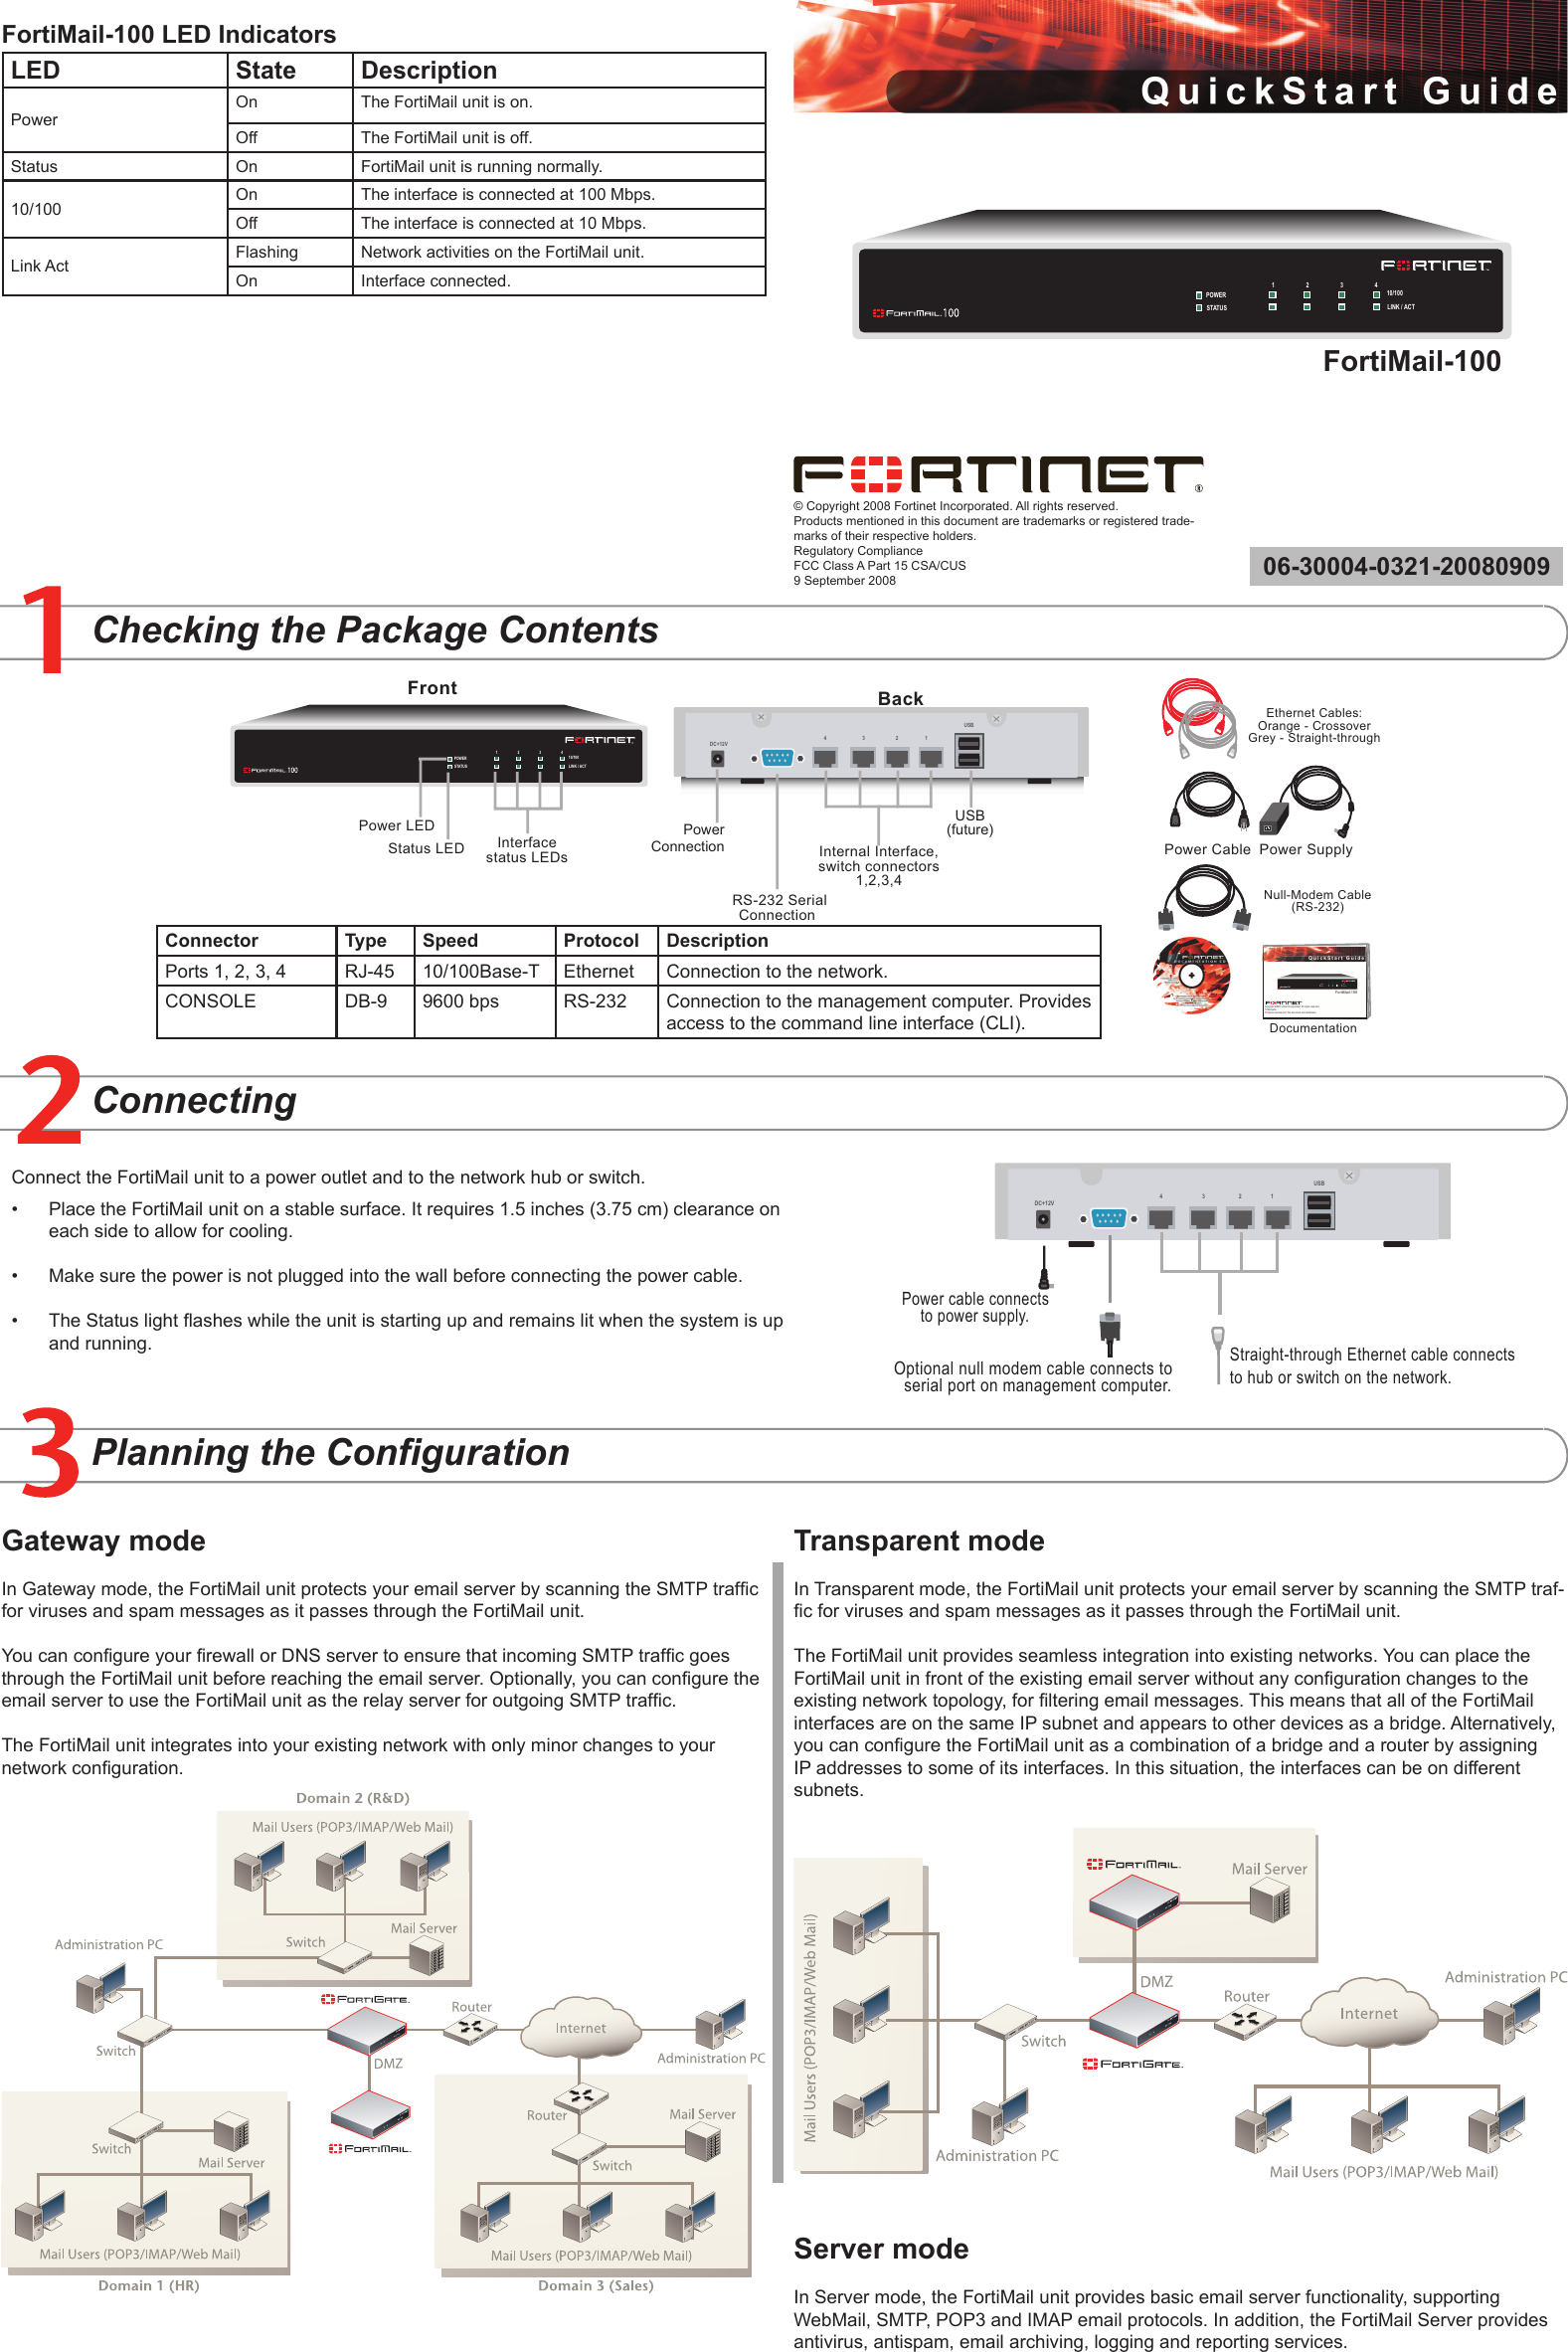 Page 1 of 2 - Fortinet FortiMail-100 QuickStart Guide User Manual  To The 4f3b4dde-bc29-472e-b81e-8cfe8414652e